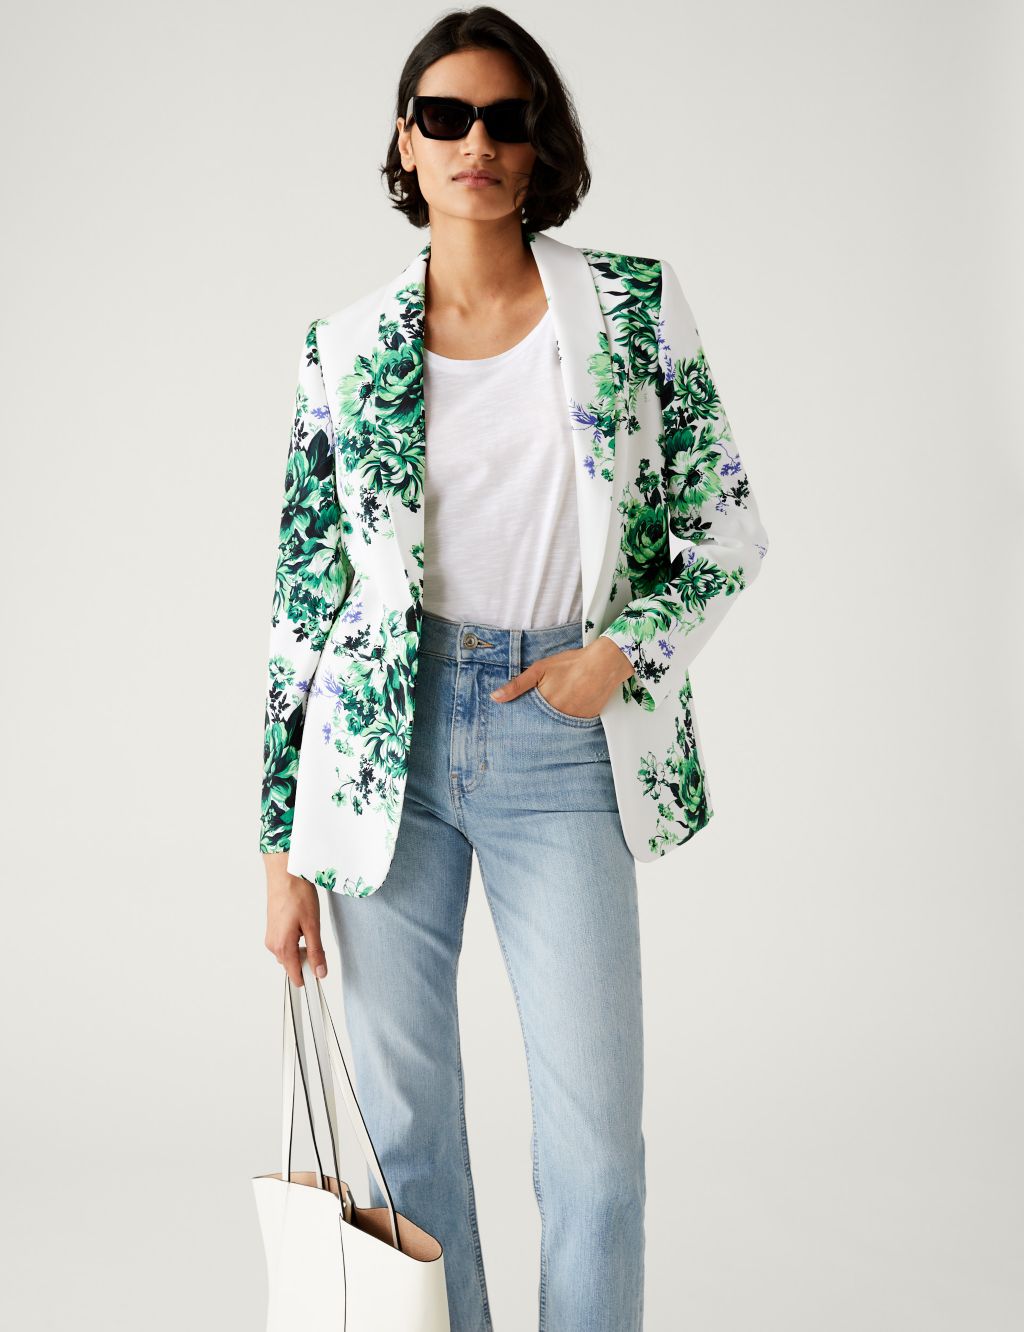 Satin Look Relaxed Floral Blazer image 1